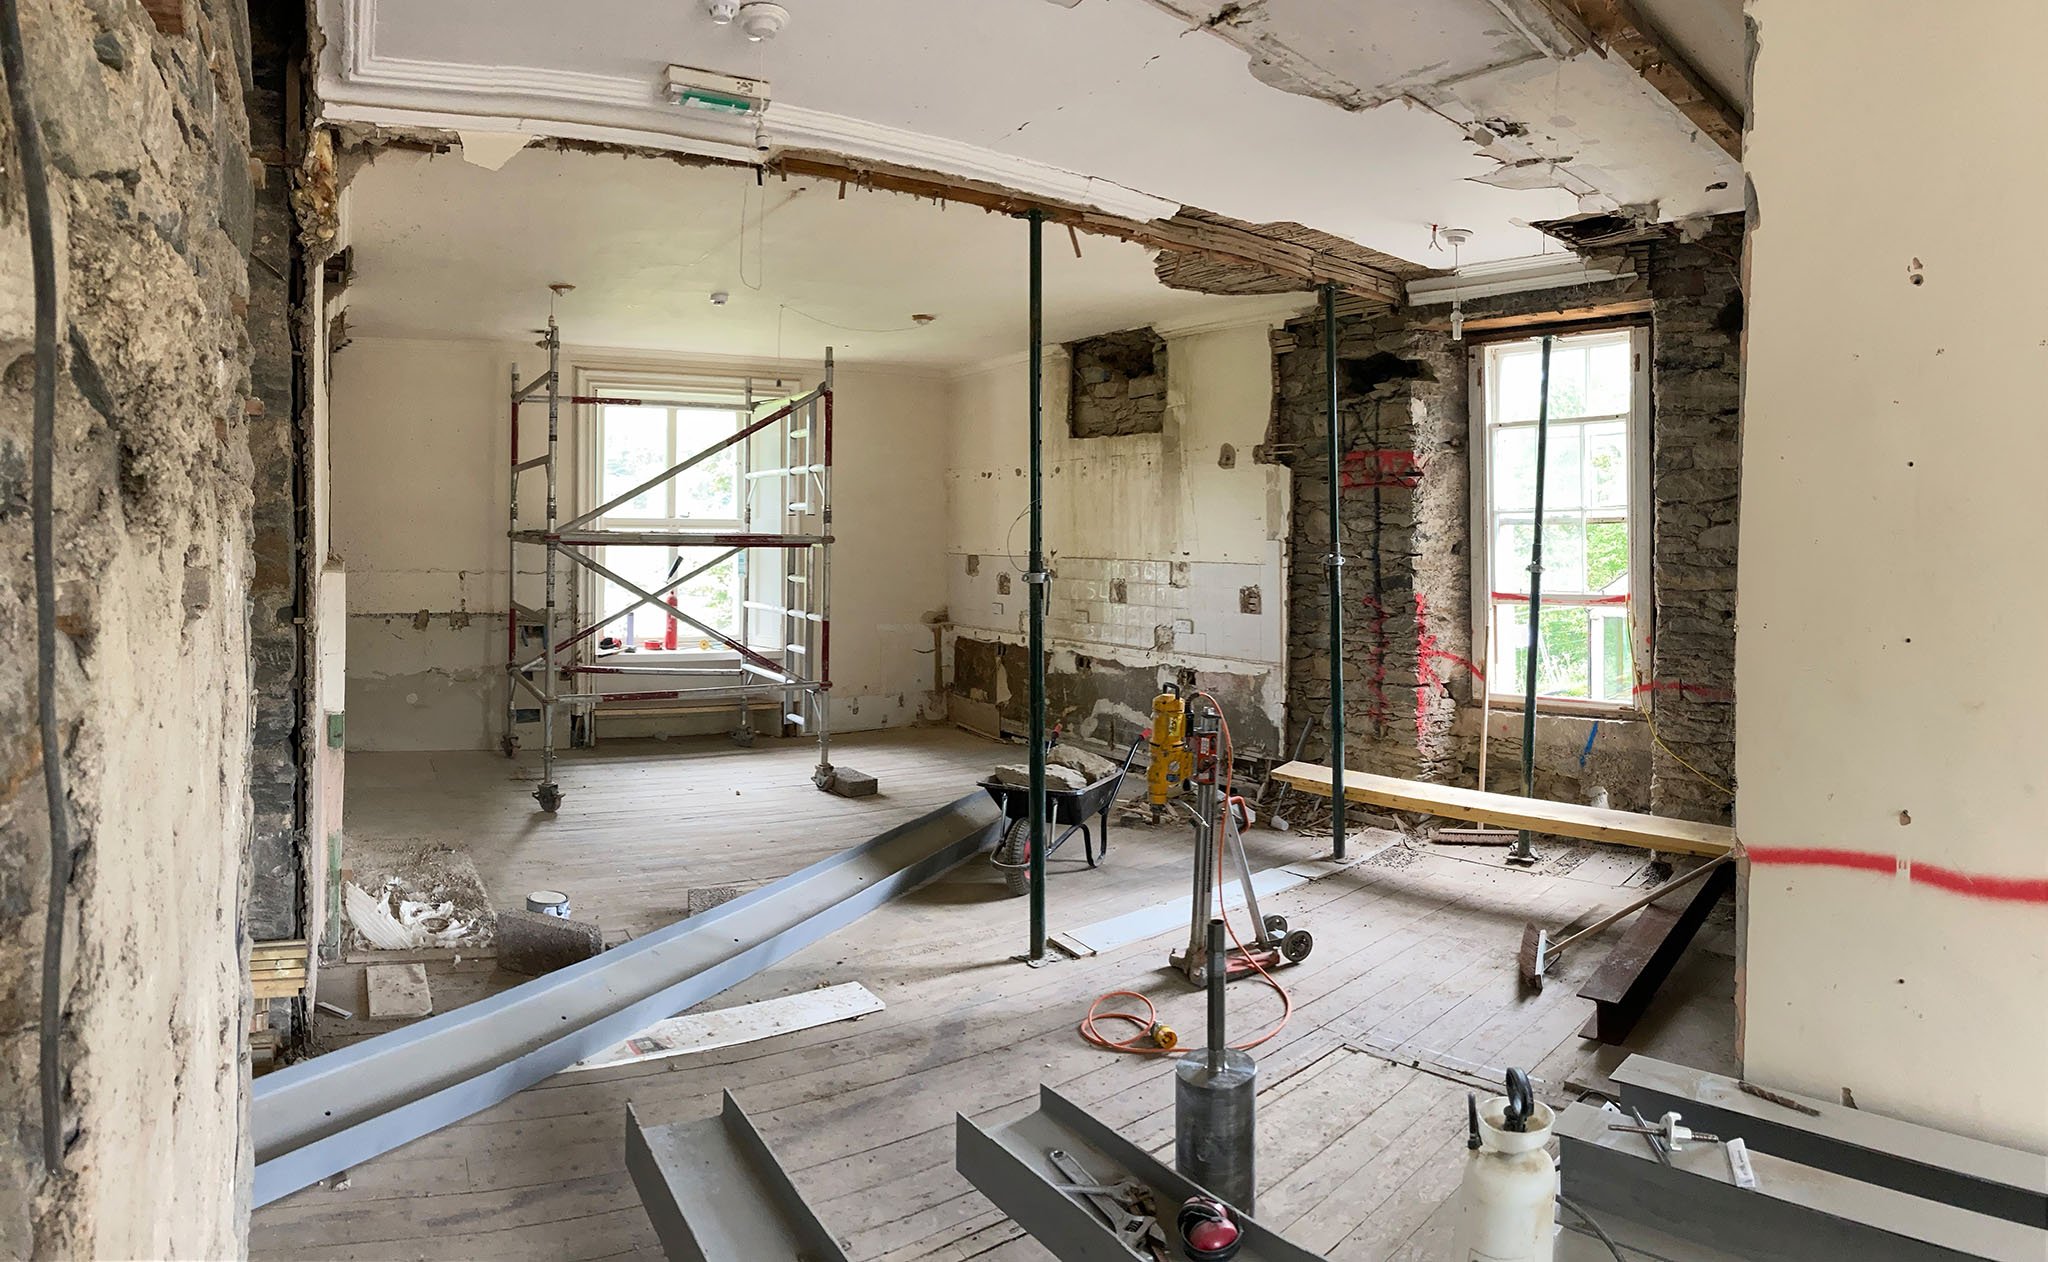  Works begins on the space that will become one of the temporary exhibition galleries. 